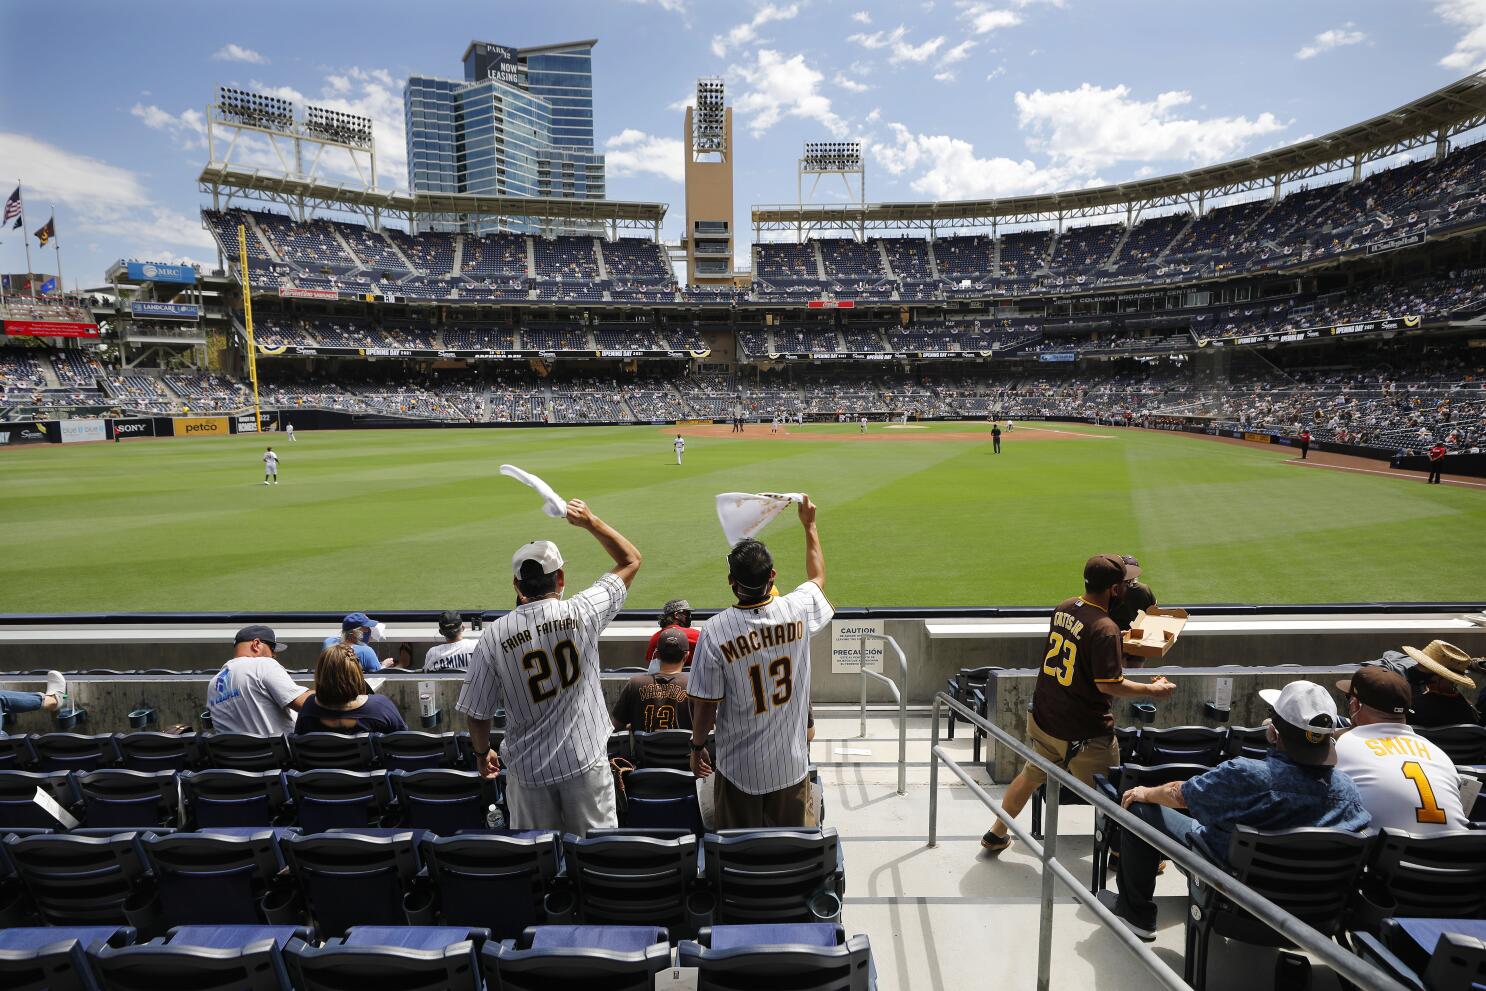 Padres to increase Petco Park capacity, open concession stands for direct  ordering - The San Diego Union-Tribune